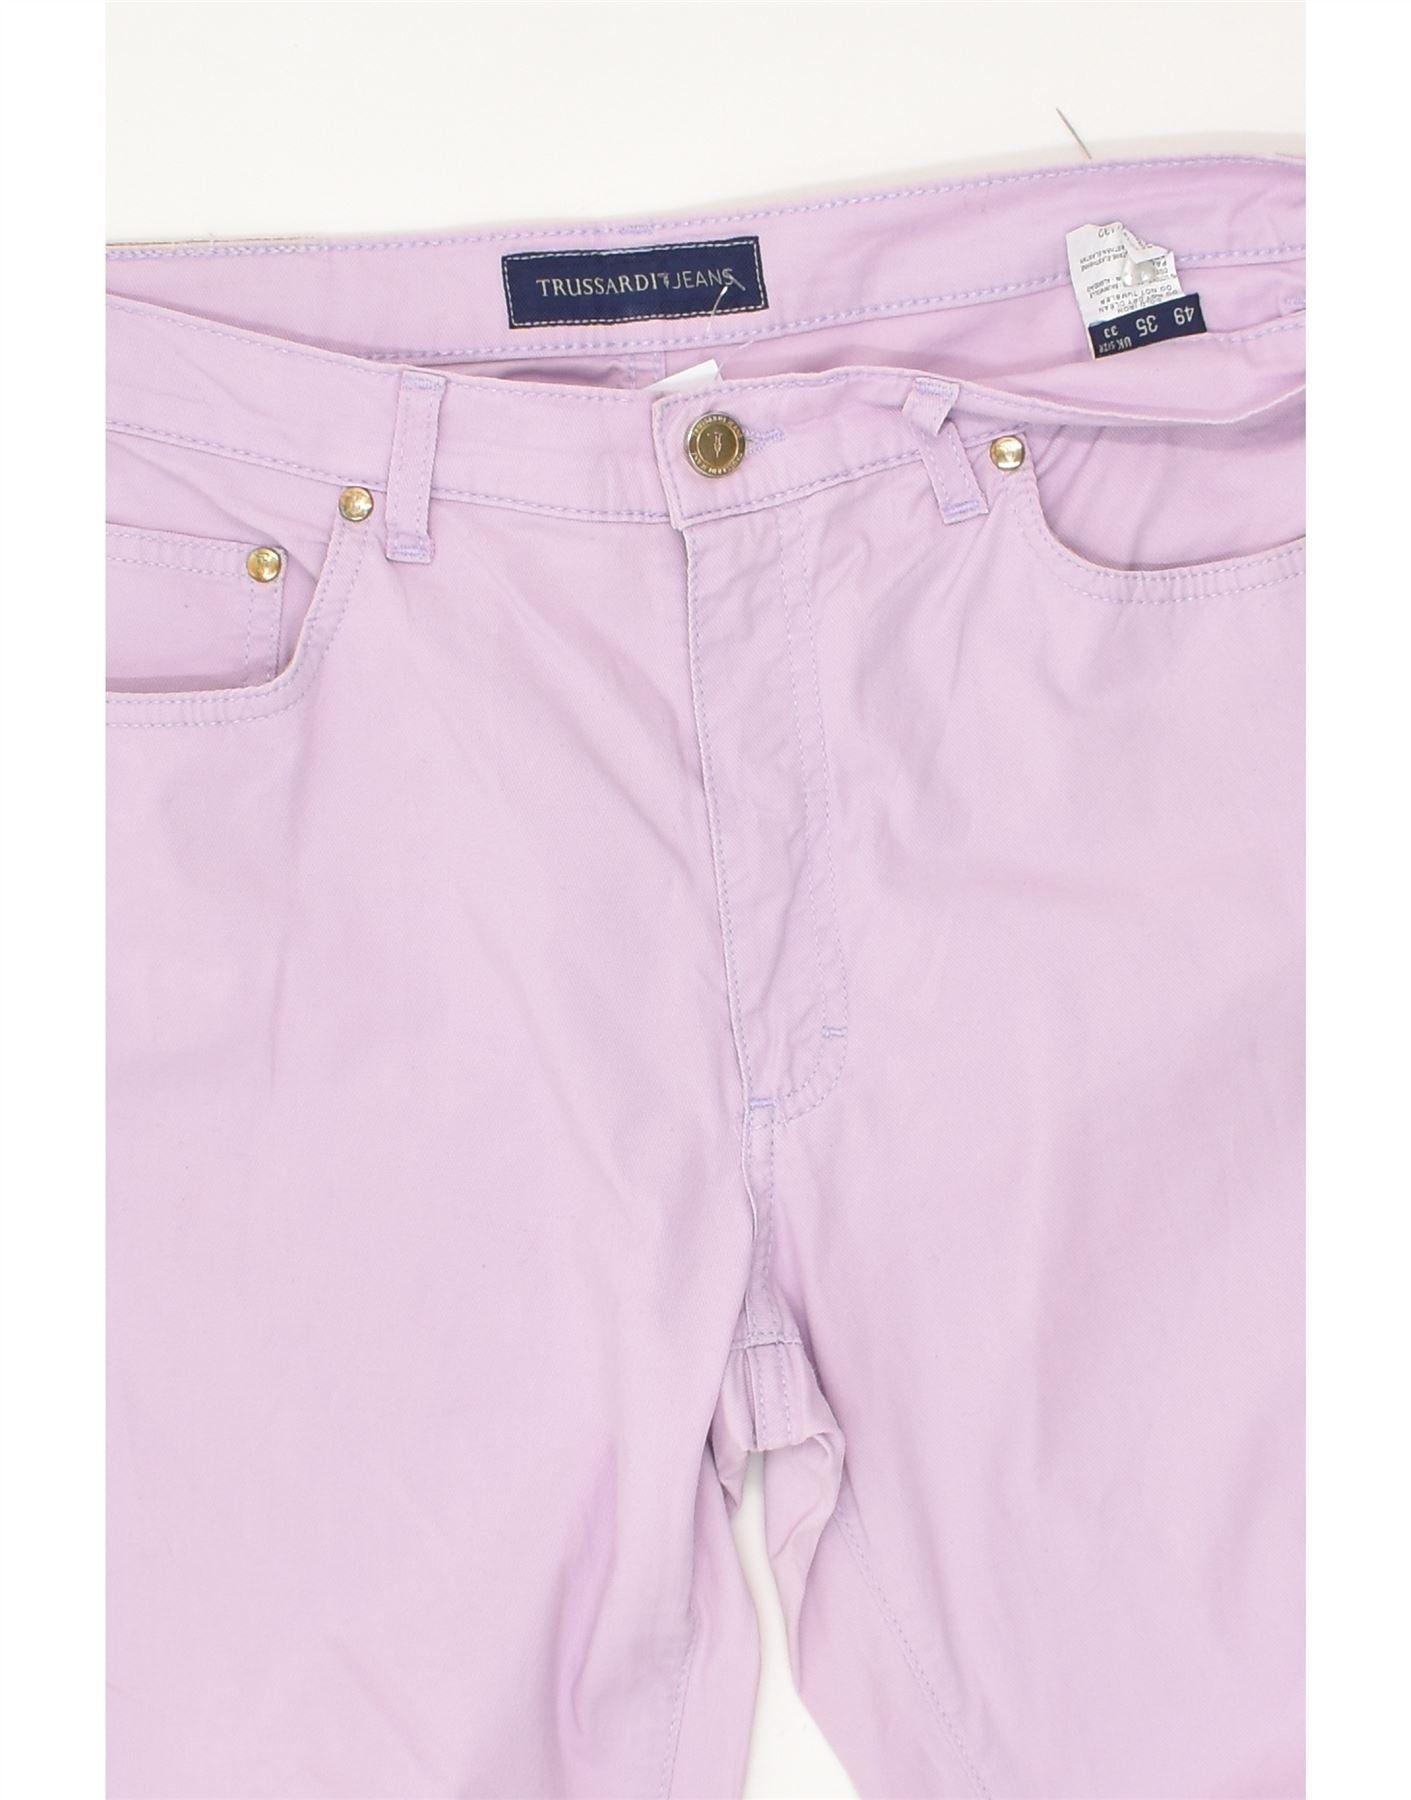 FILA Womens Casual Shorts UK 12 Medium W30 Pink Cotton, Vintage &  Second-Hand Clothing Online